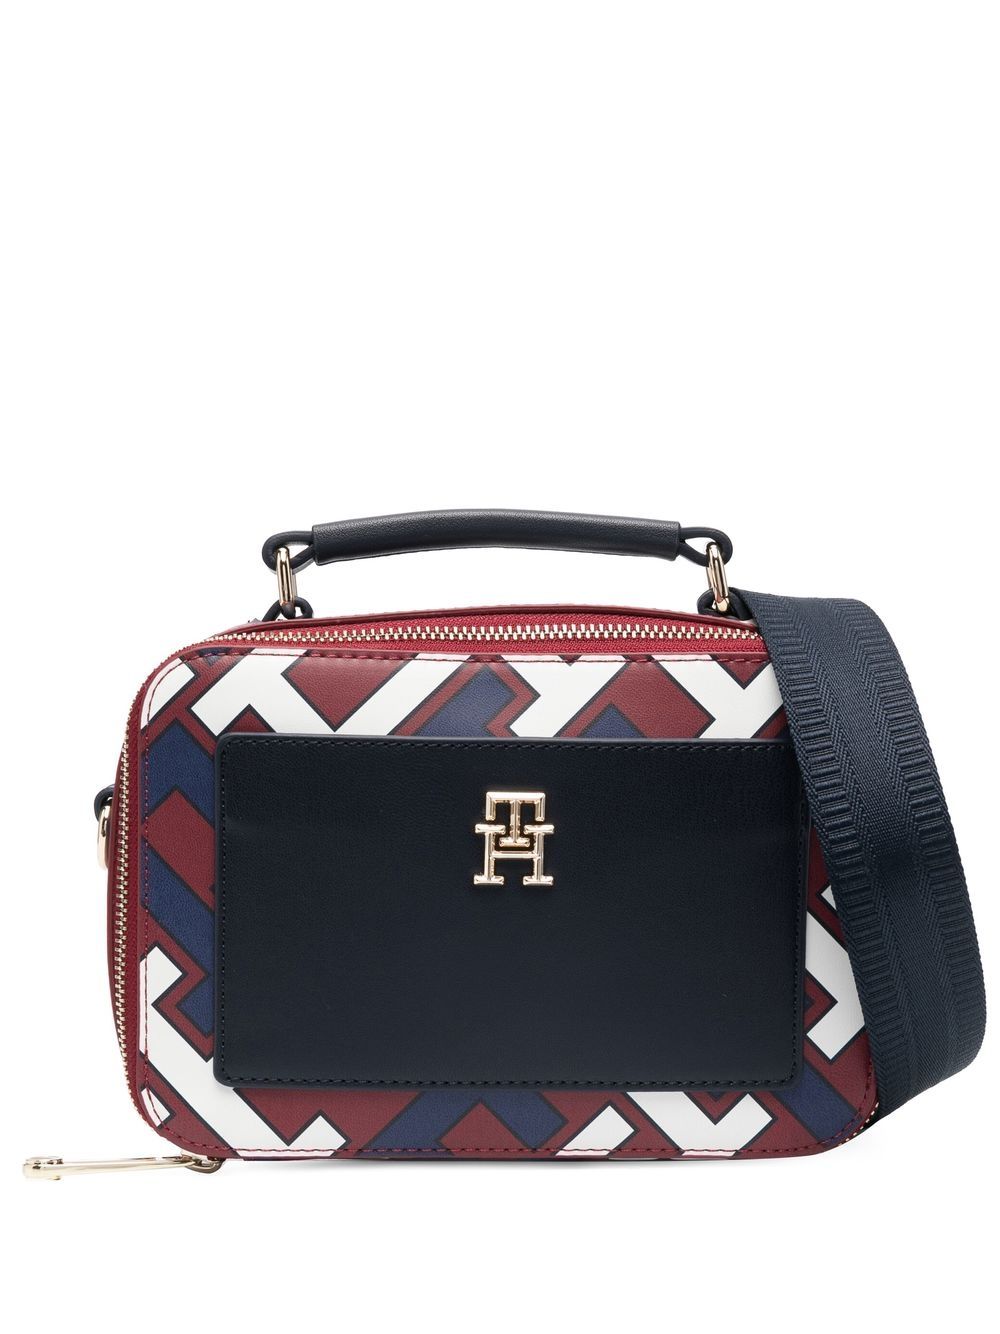 Tommy Hilfiger Iconic Trunk Monogram Crossbody Bag In Red | ModeSens